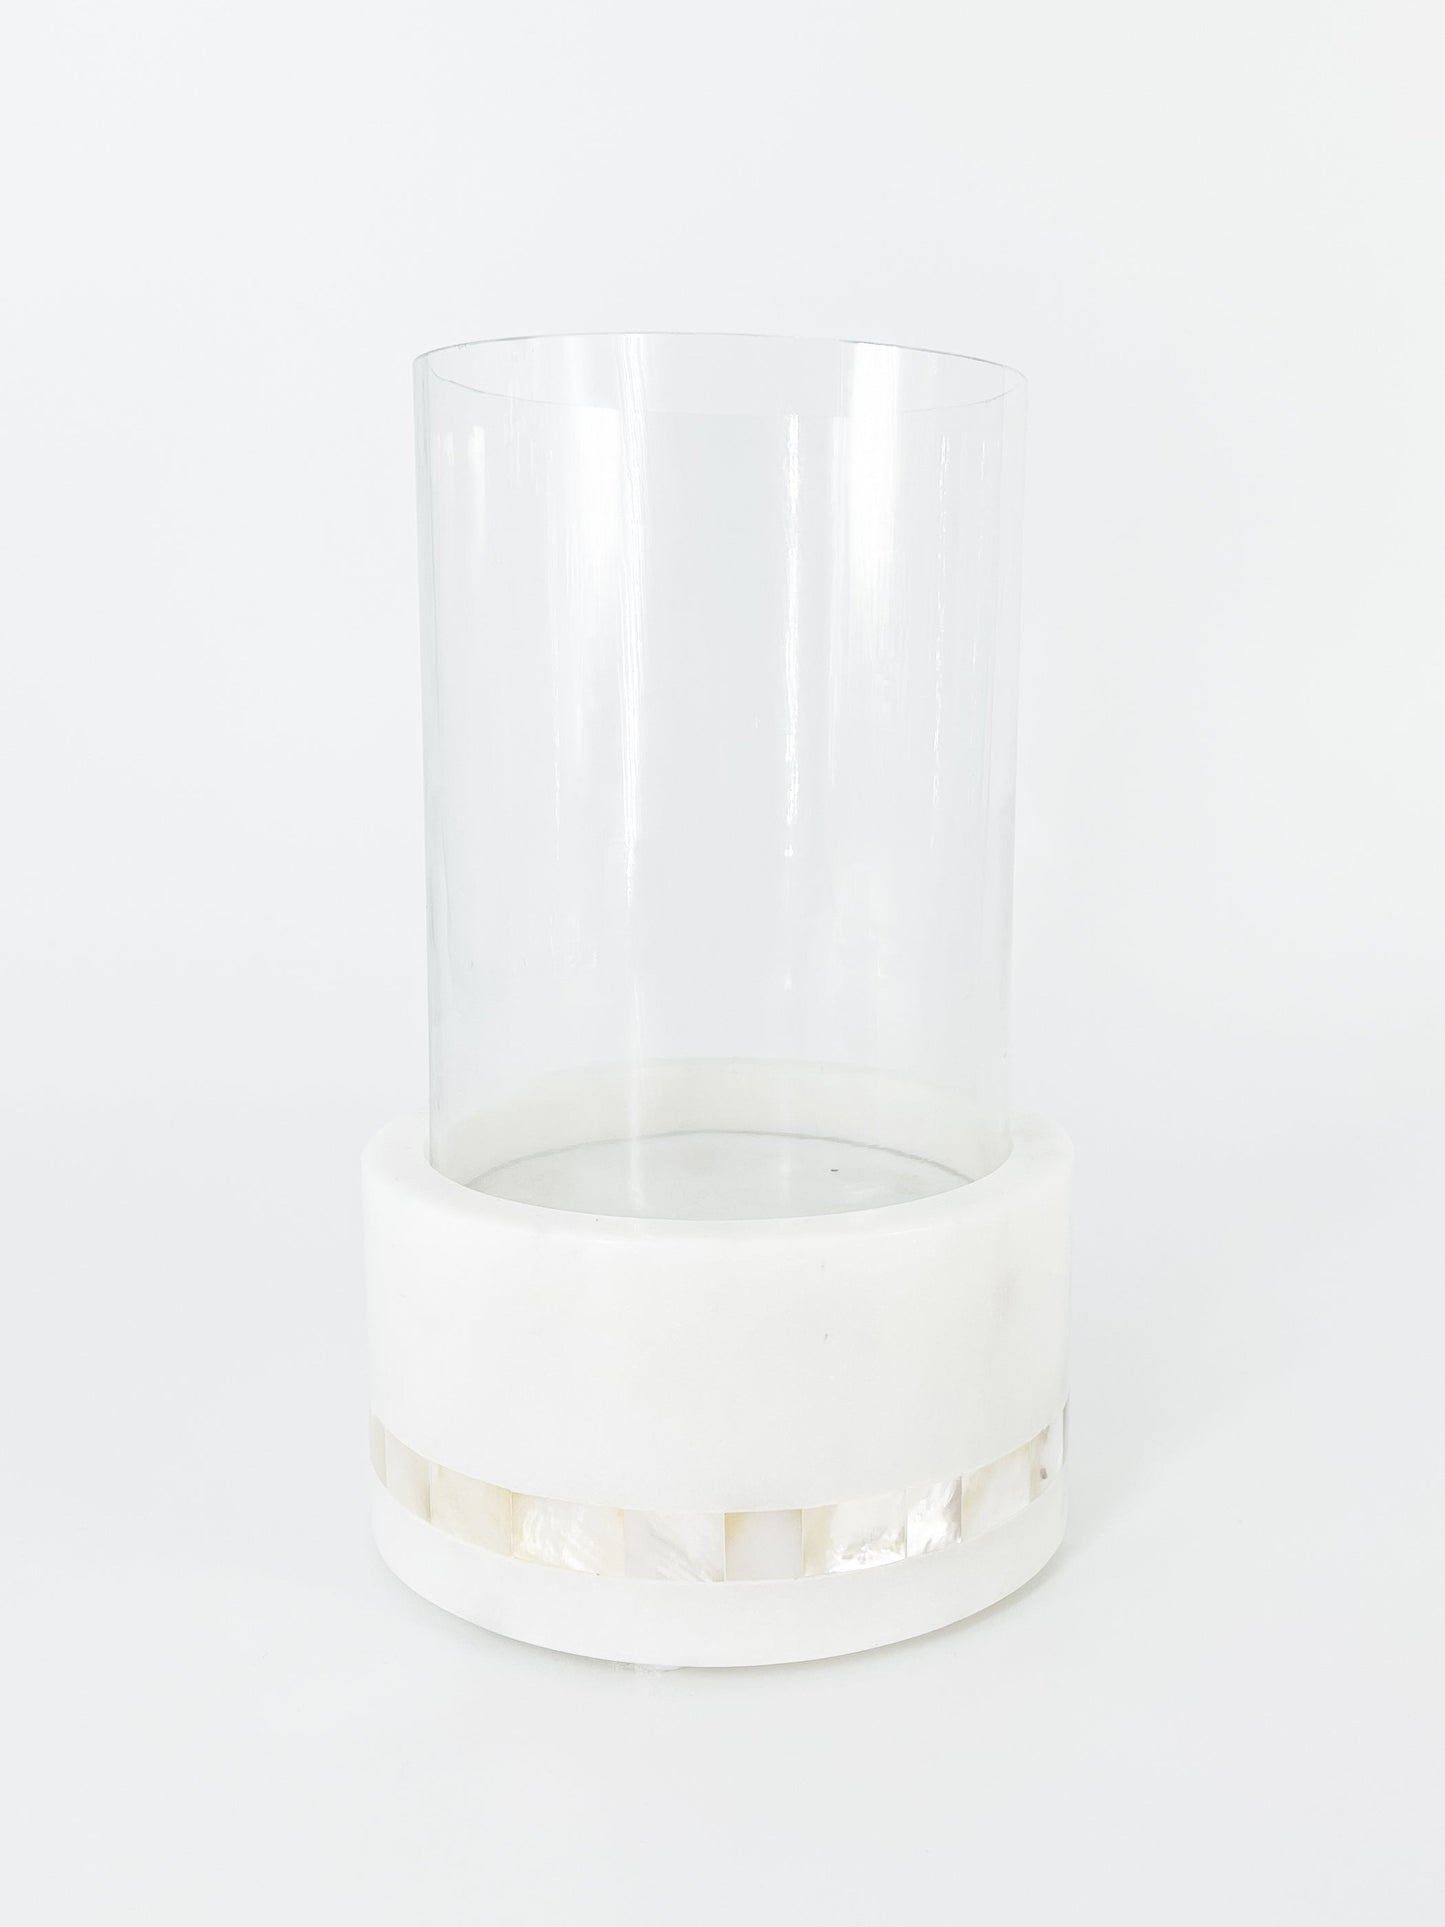 White Marble Hurricane Candle Holder with Mother of Pearl Stripe by Anaya